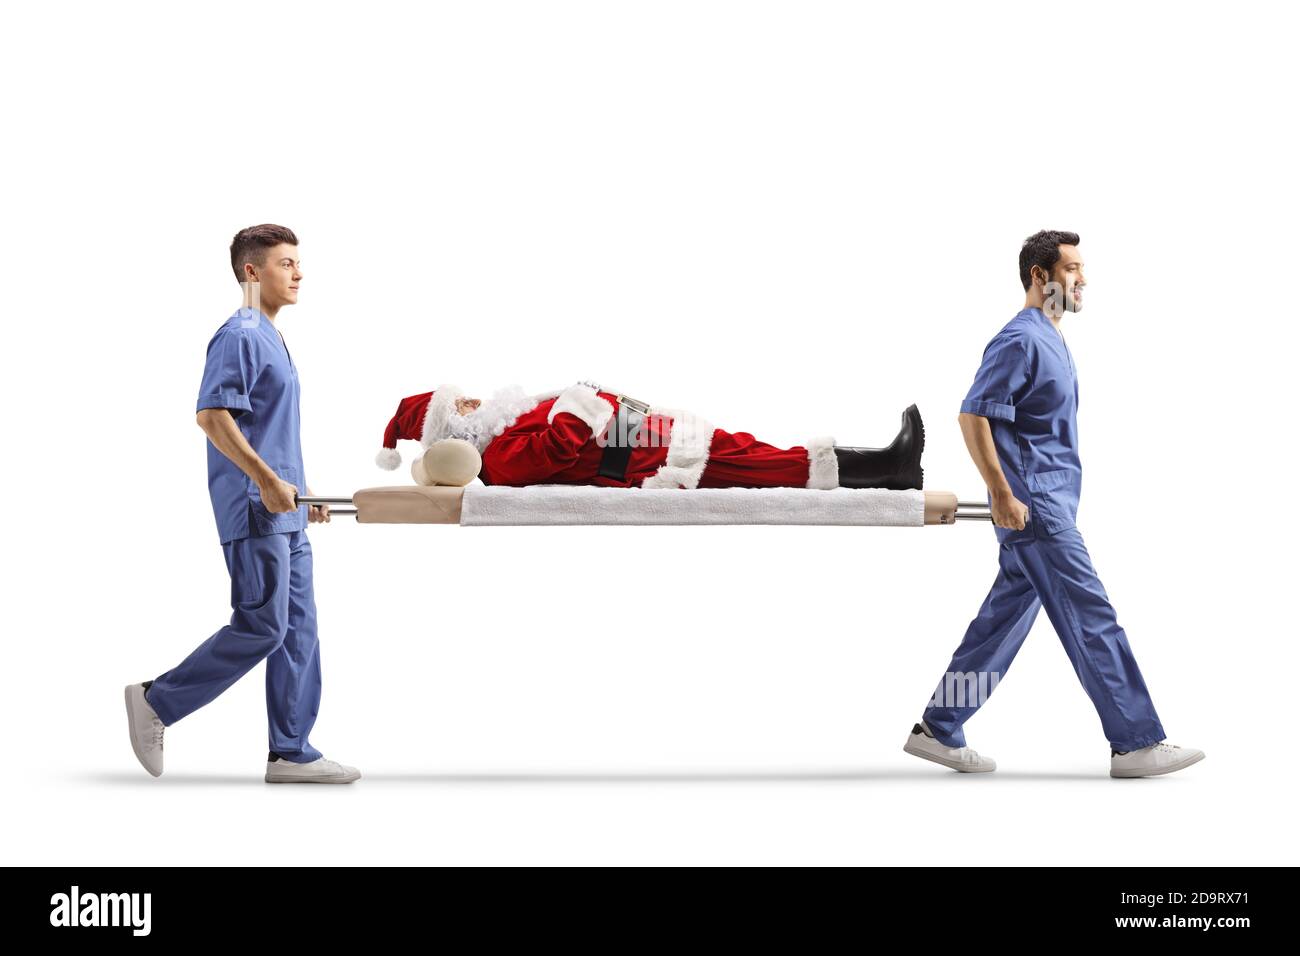 Two male health workers carrying Santa Claus on a stretcher  isolated on white background Stock Photo